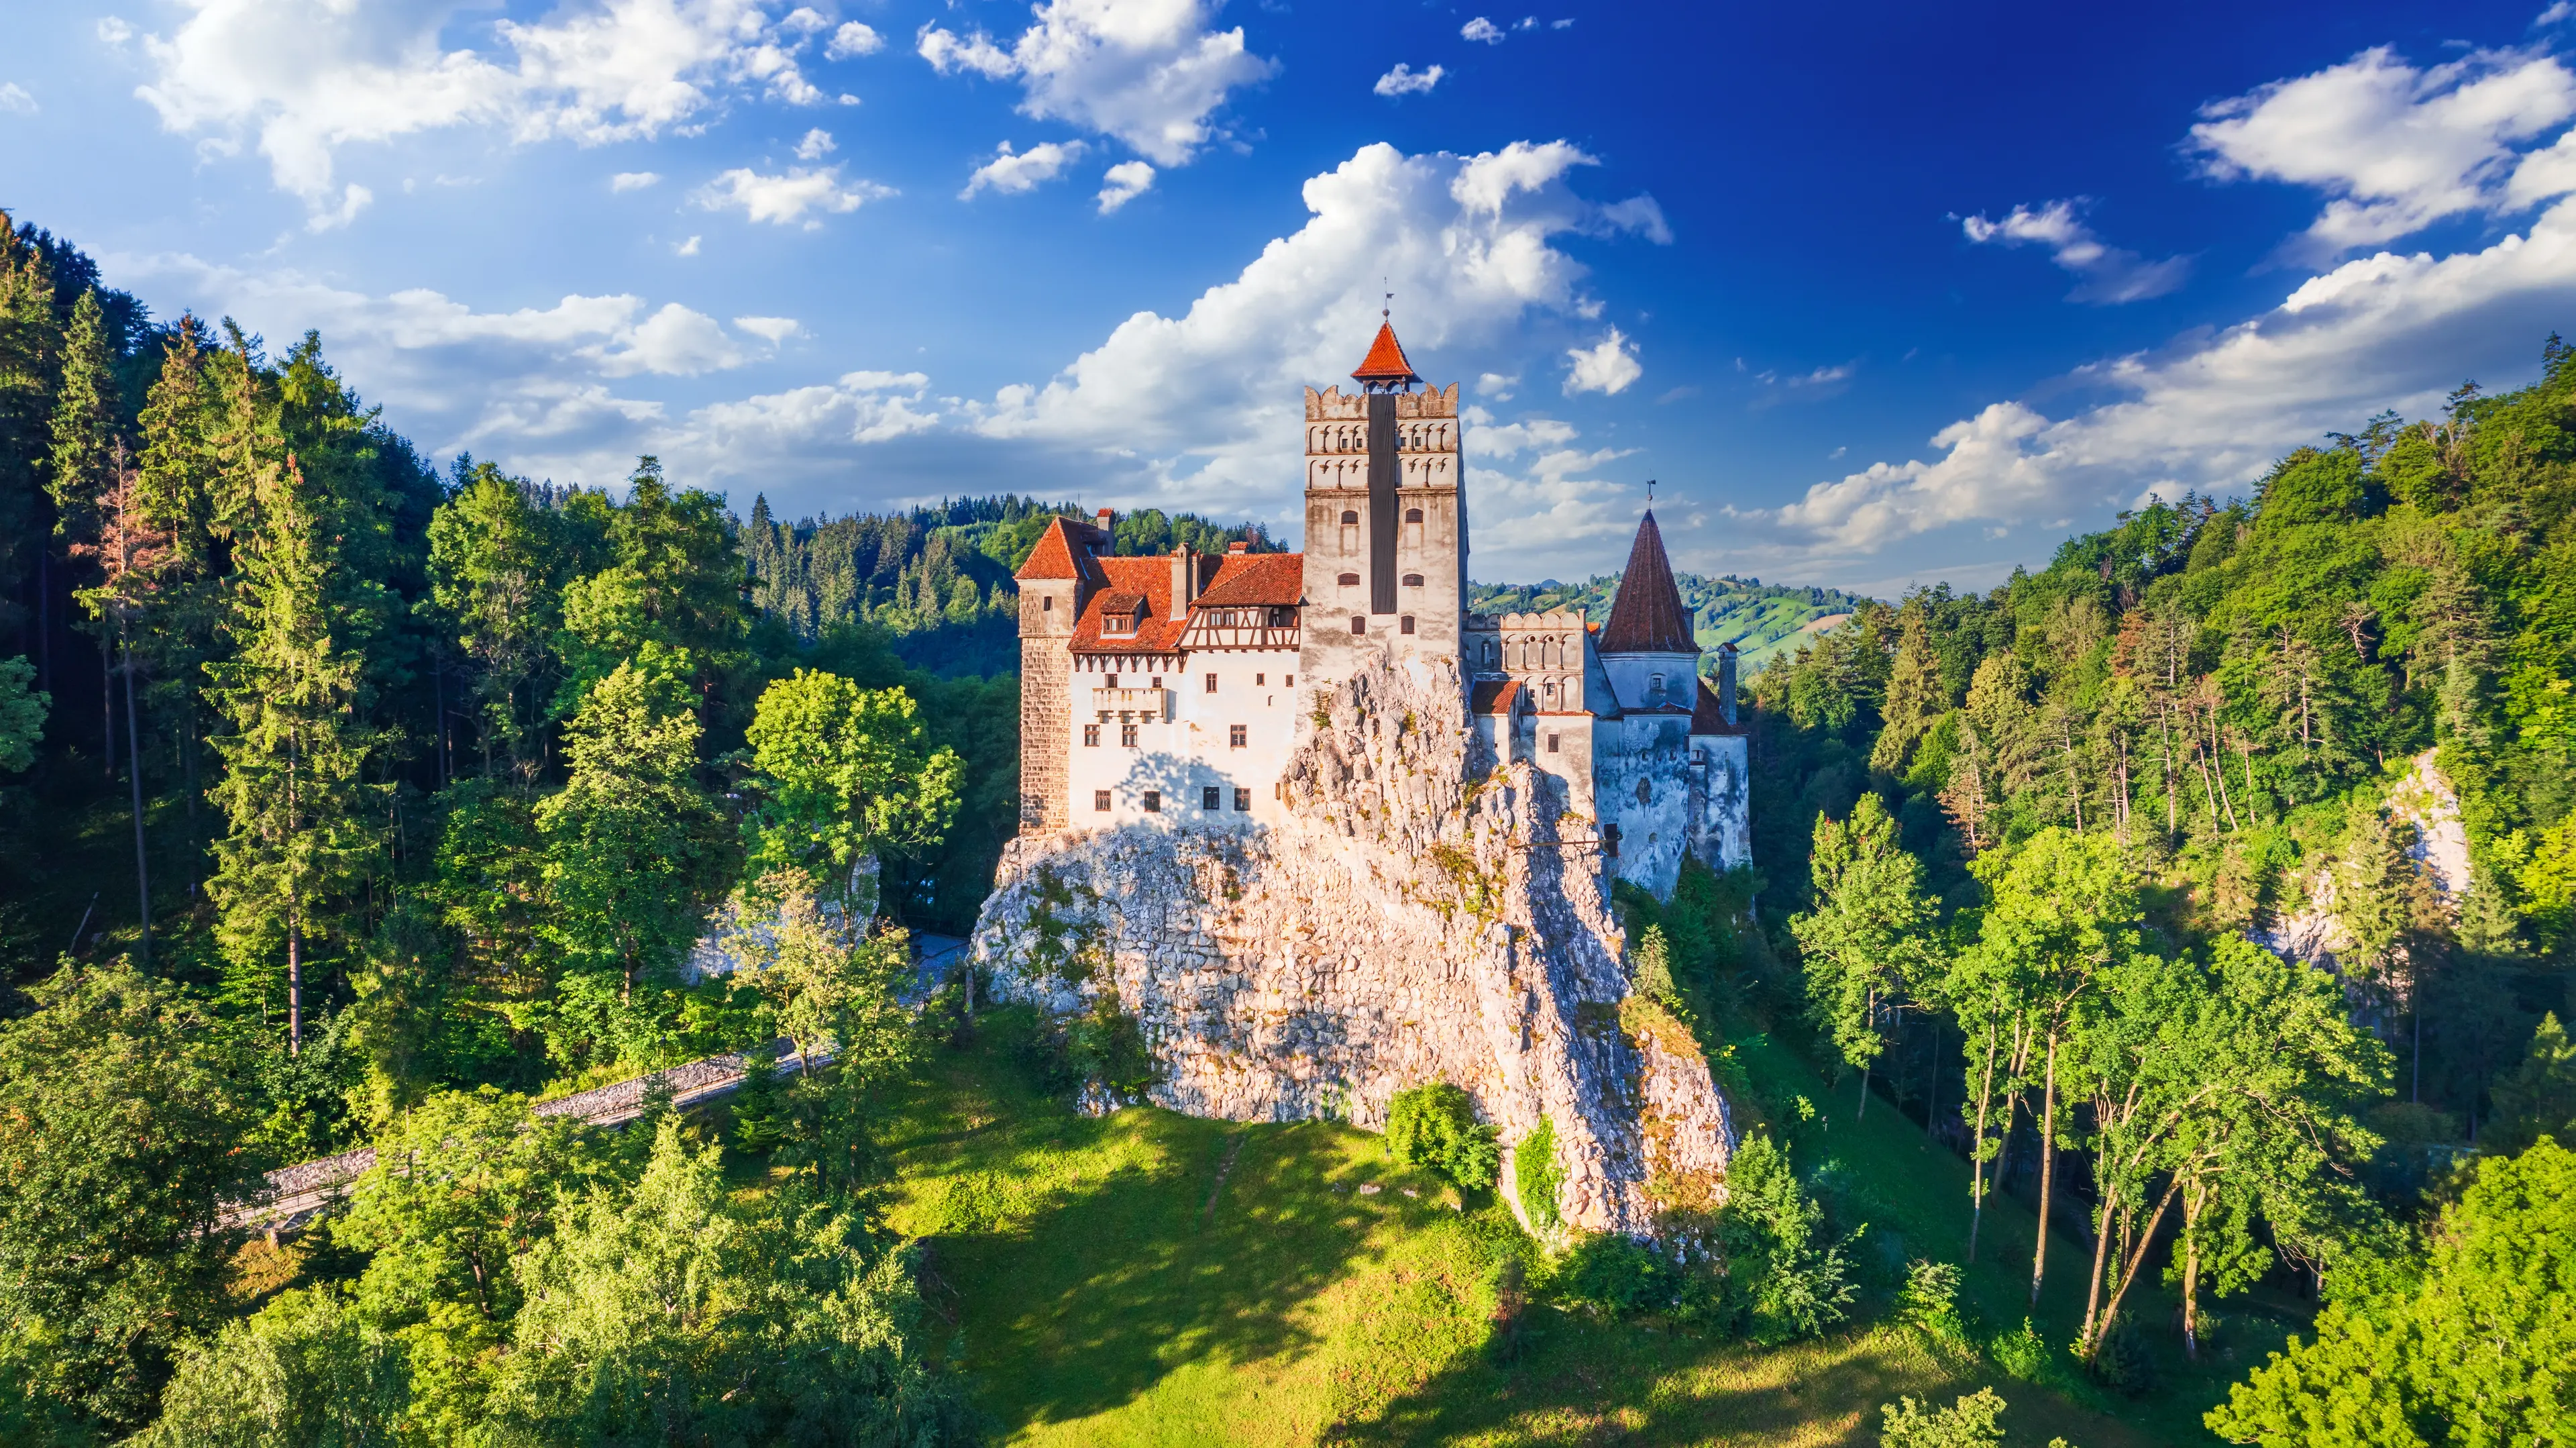 1-Day Solo Brasov Adventure: Sightseeing, Dining & Wine for Locals